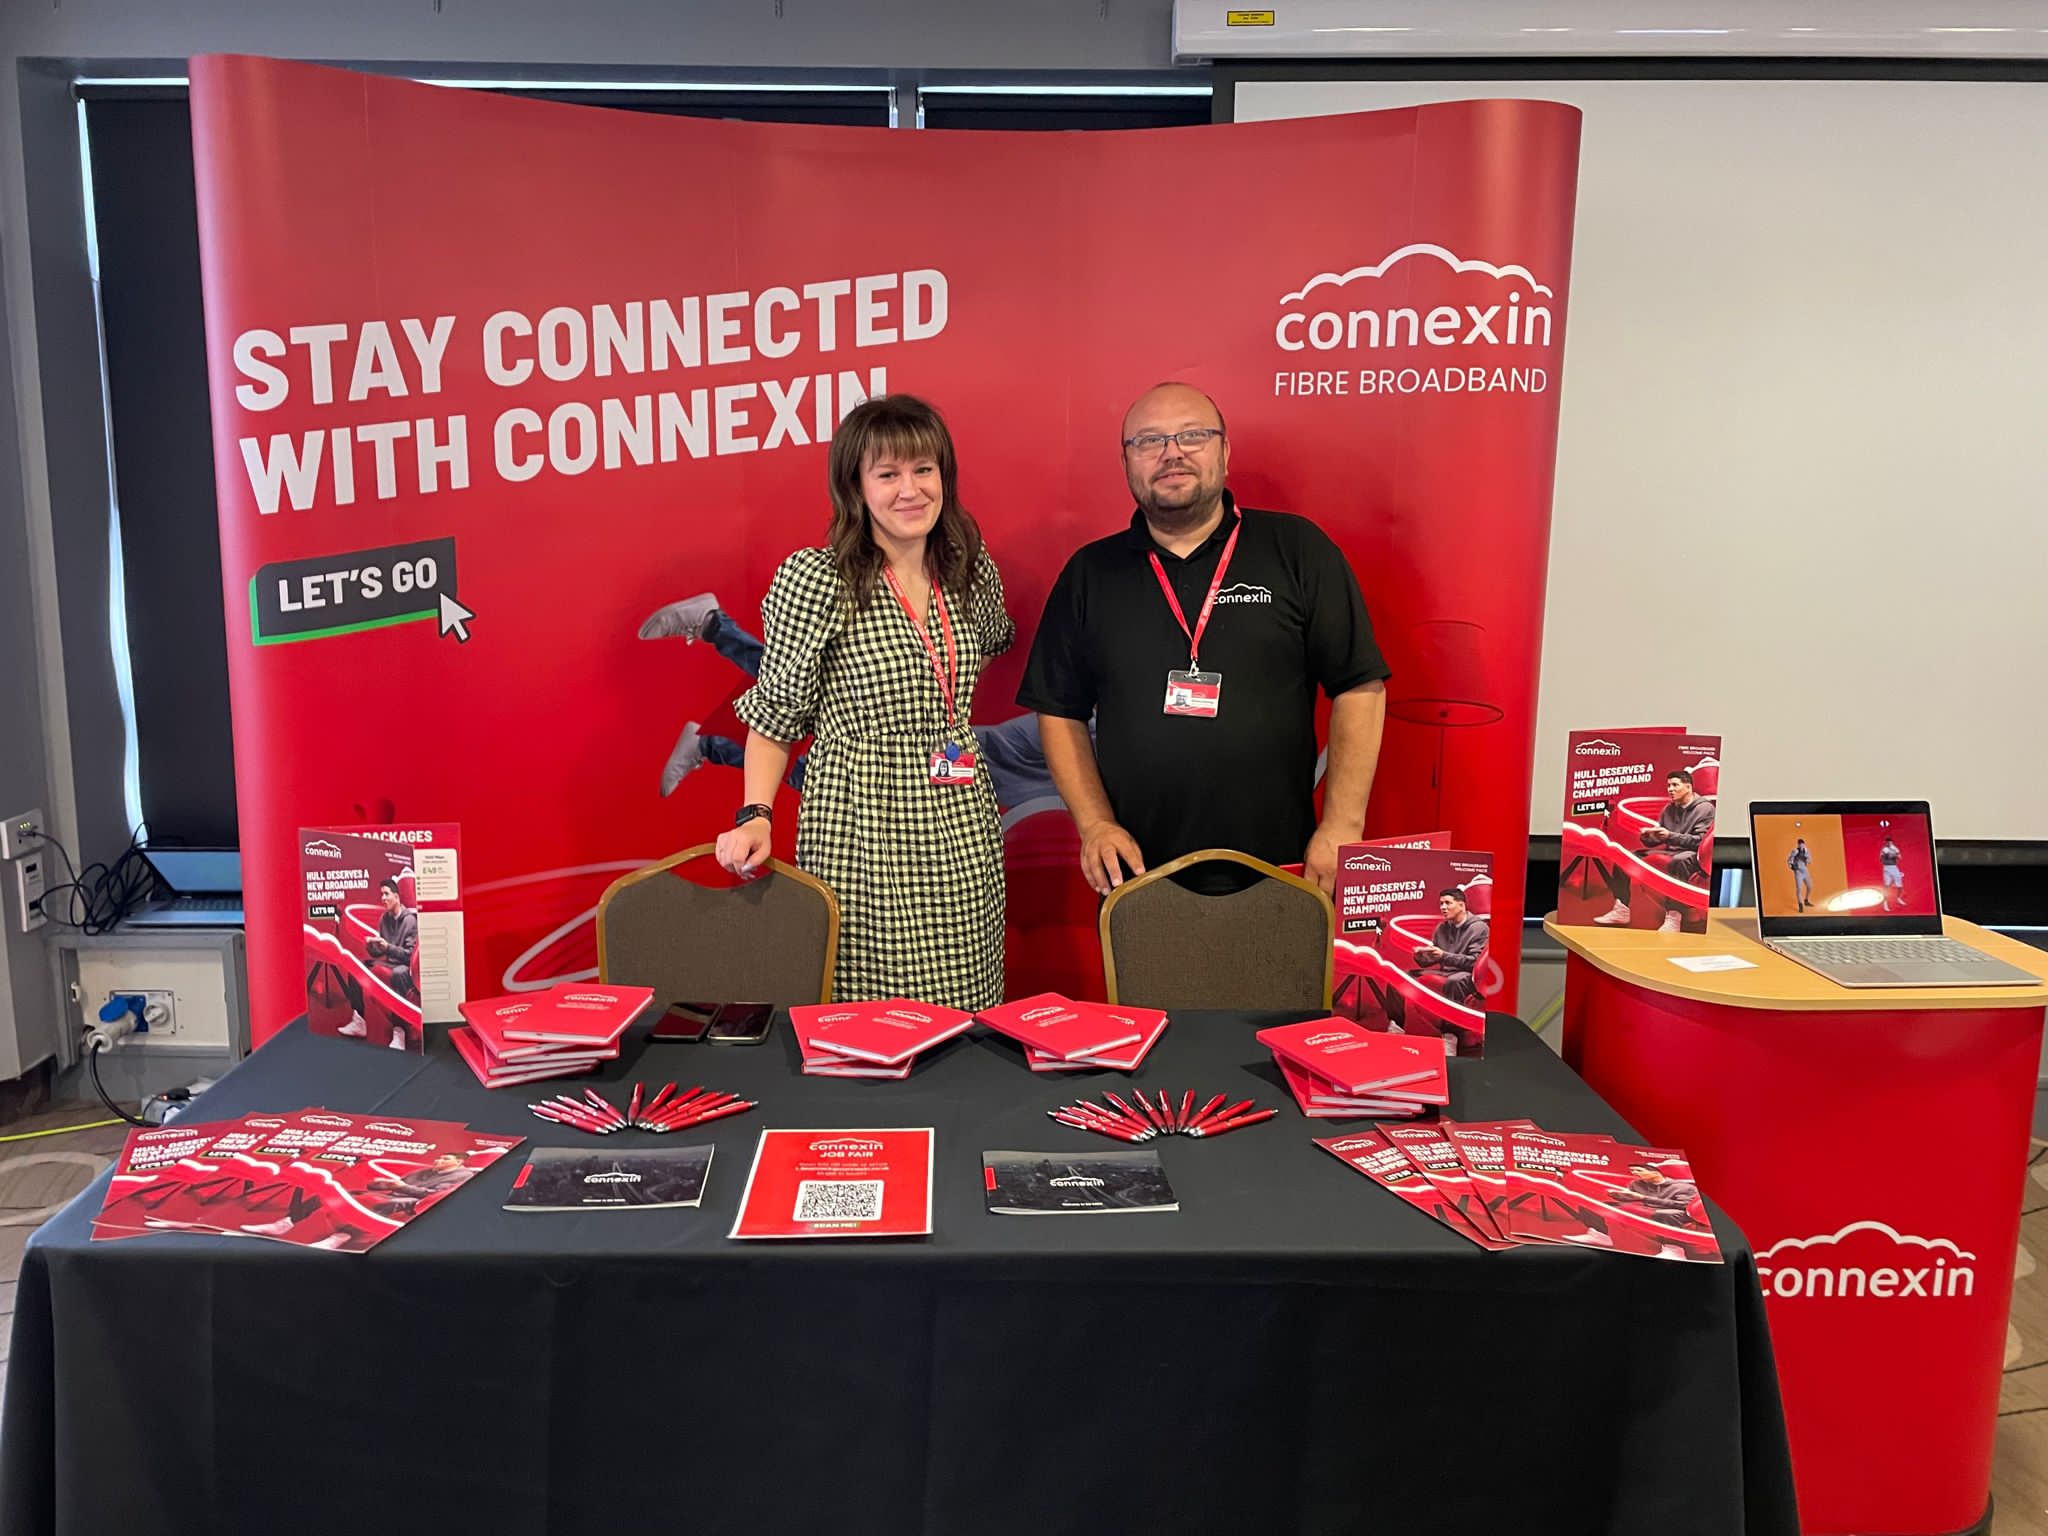 Connexin at our event in Hull